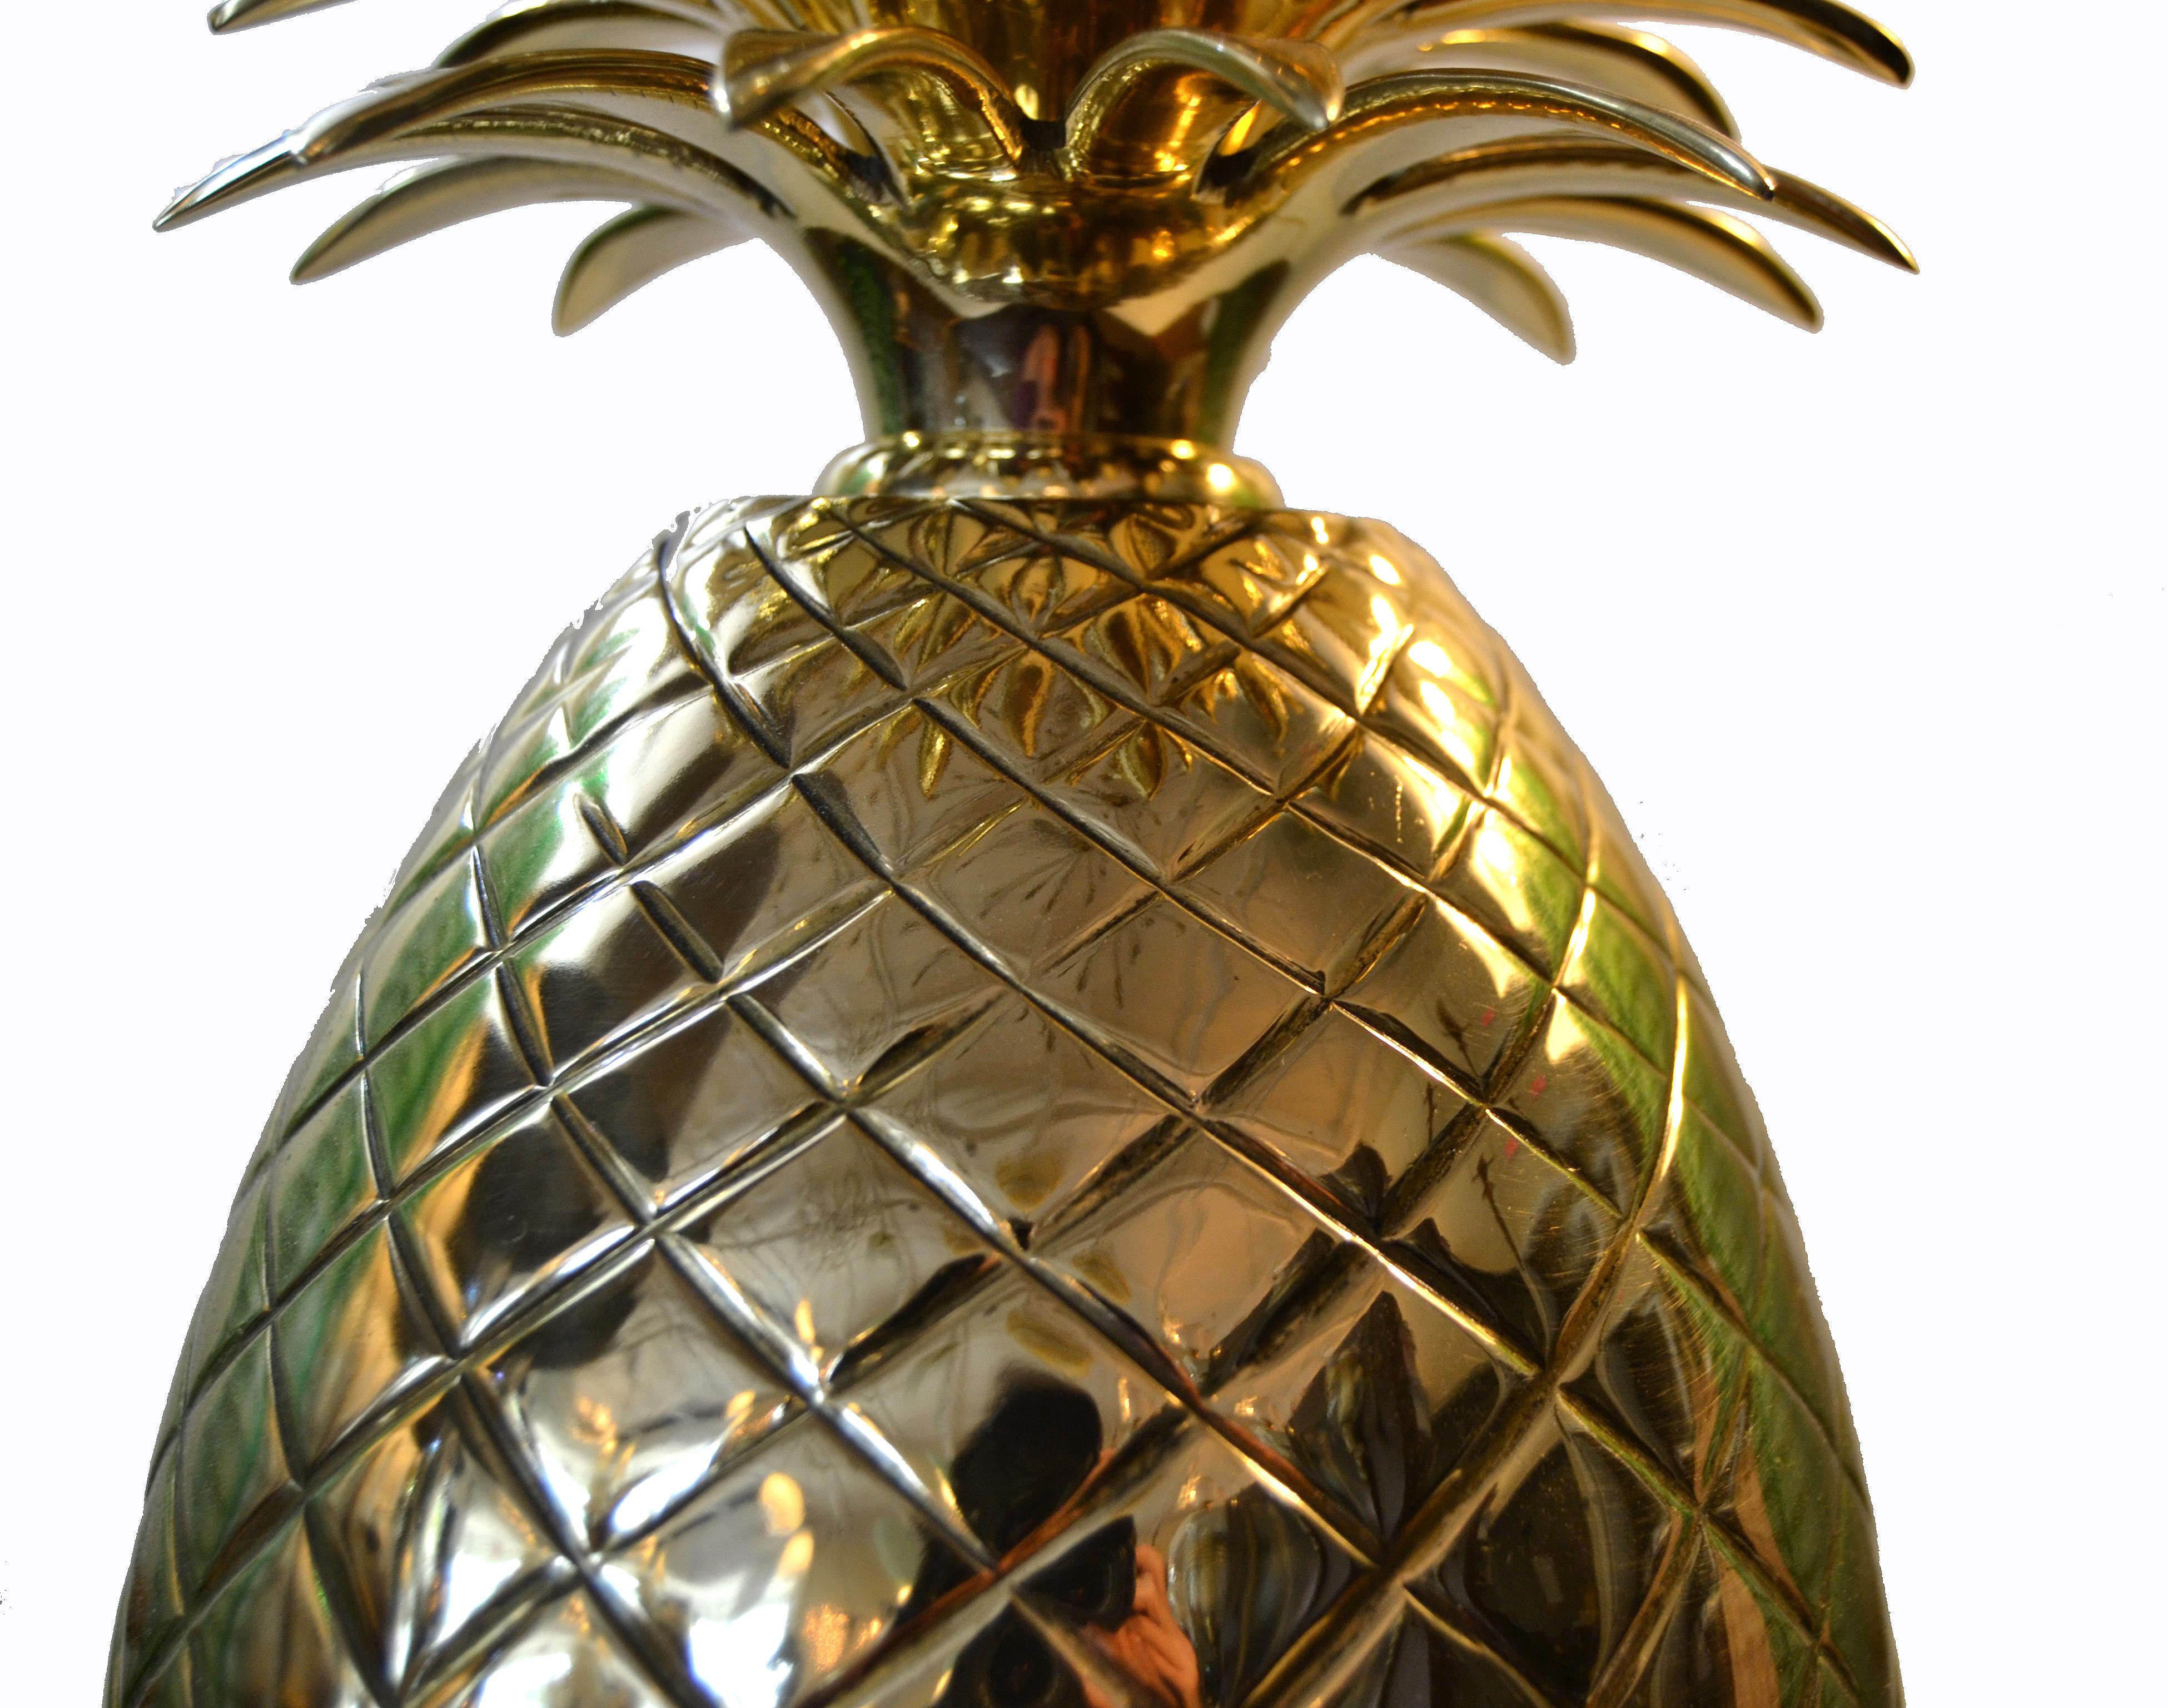 Hollywood Regency Sculptural Bronze Pineapple Table Lamp with Harp and Finial 1